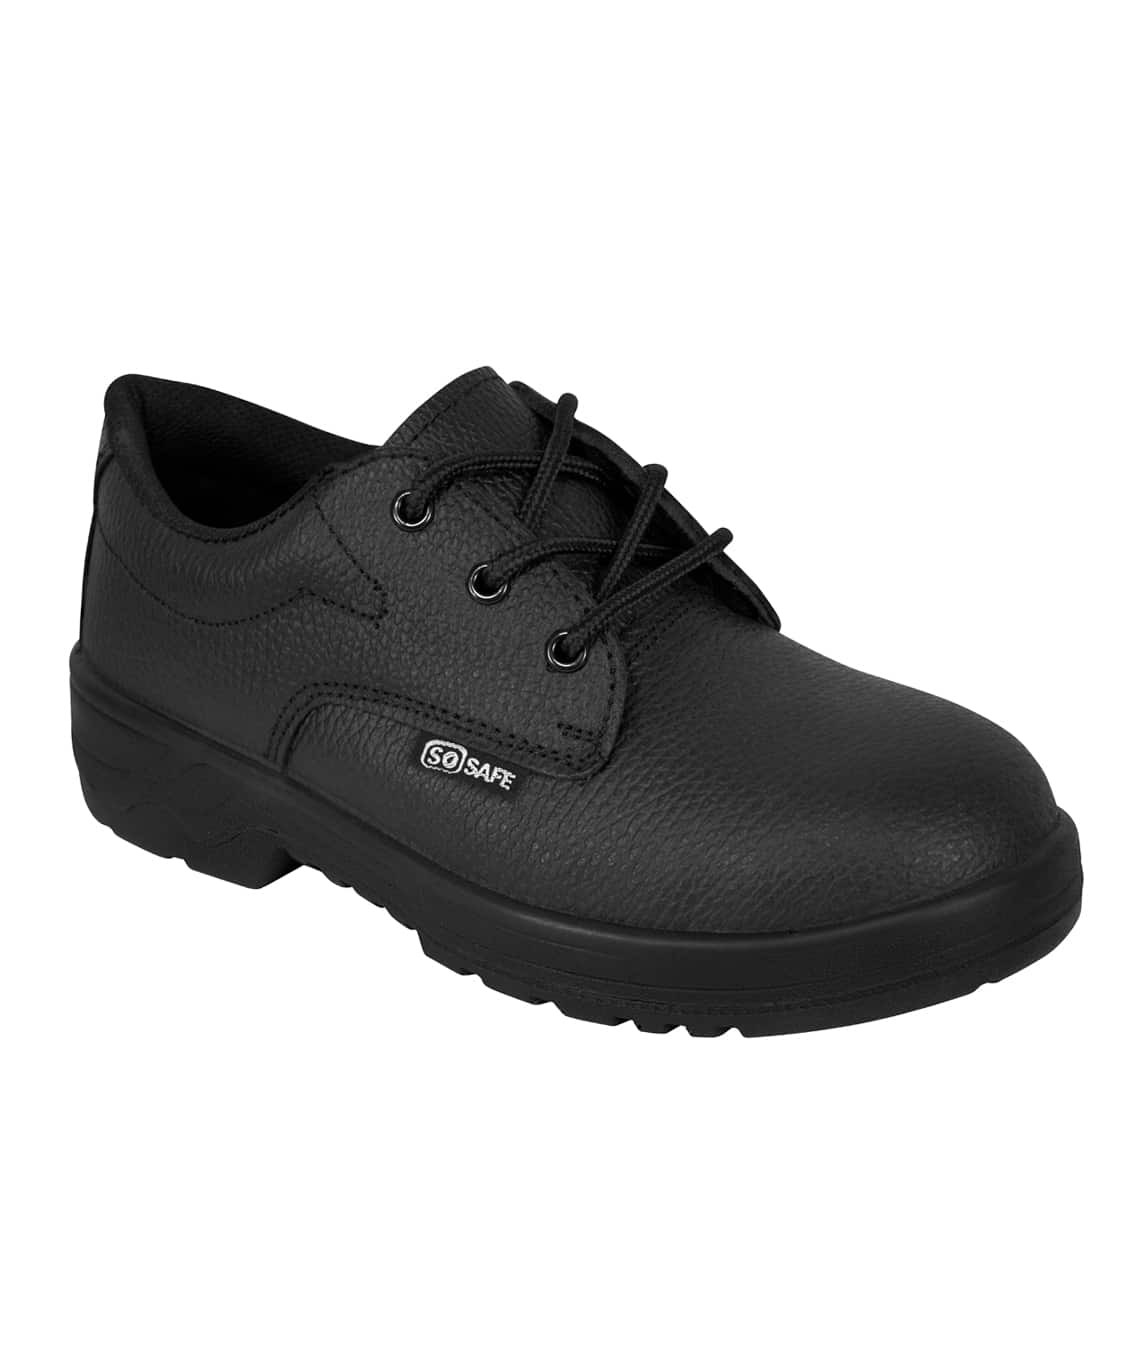 So Safe S1p Black Leather Gibson Shoe